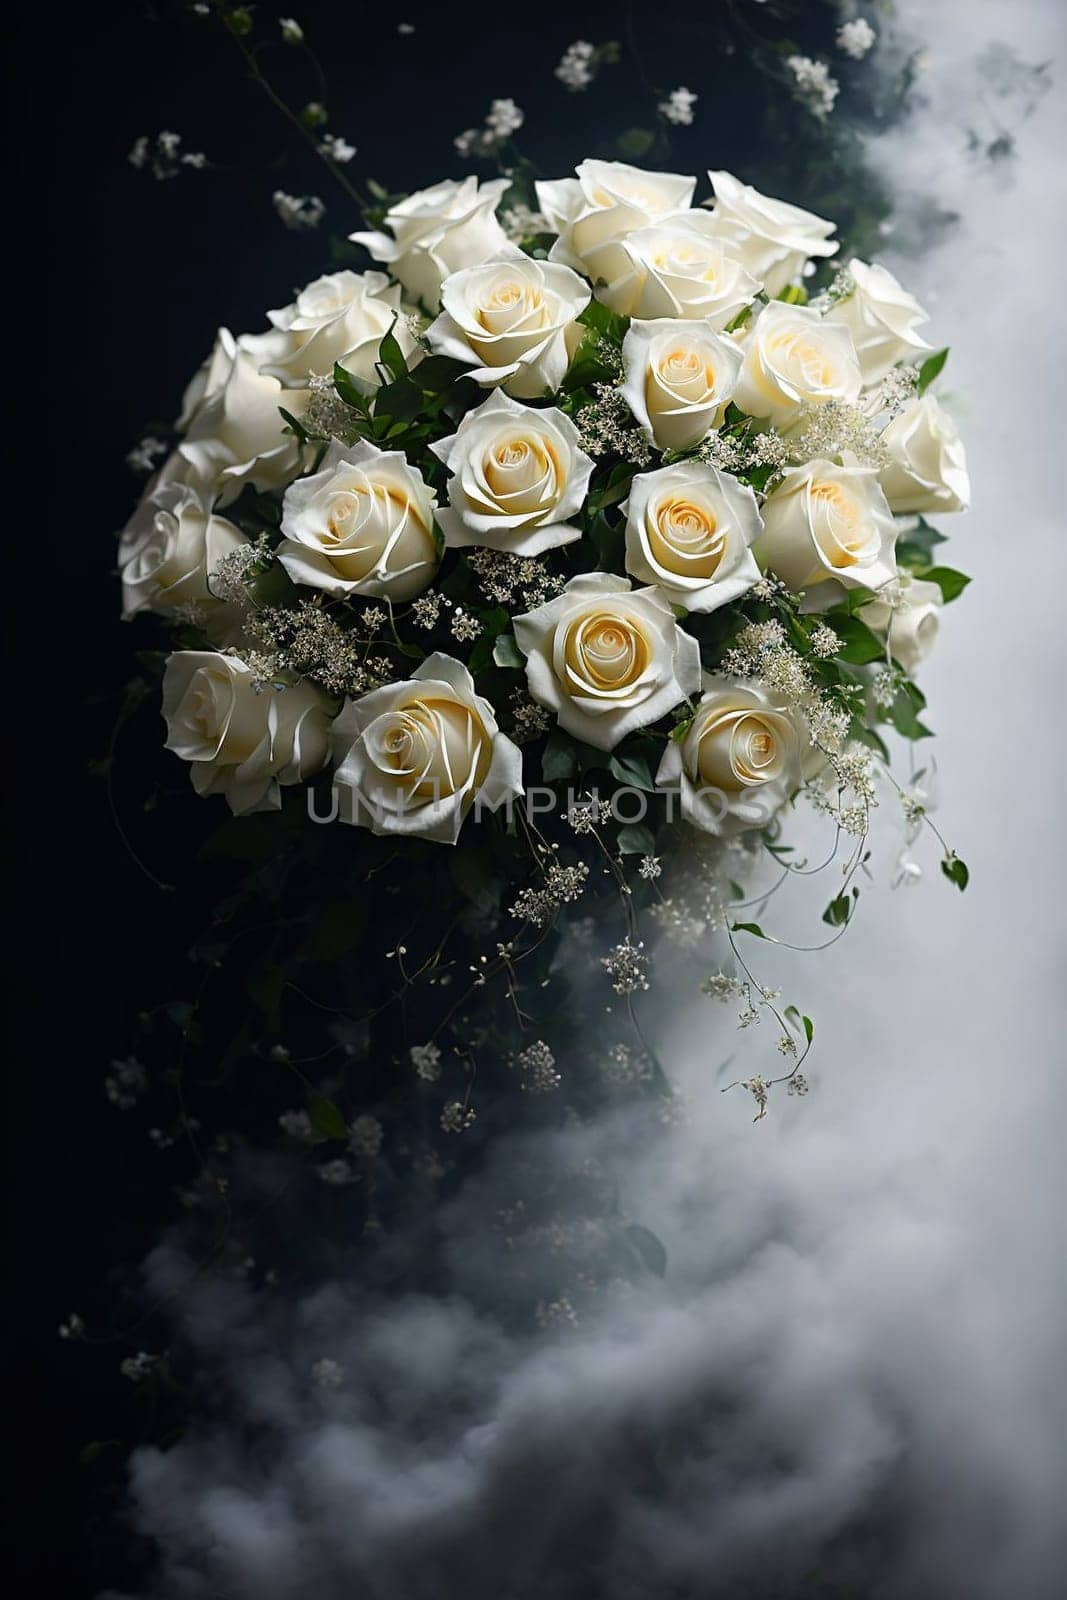 bouquet of white roses on an abstract black and white background. by Rawlik